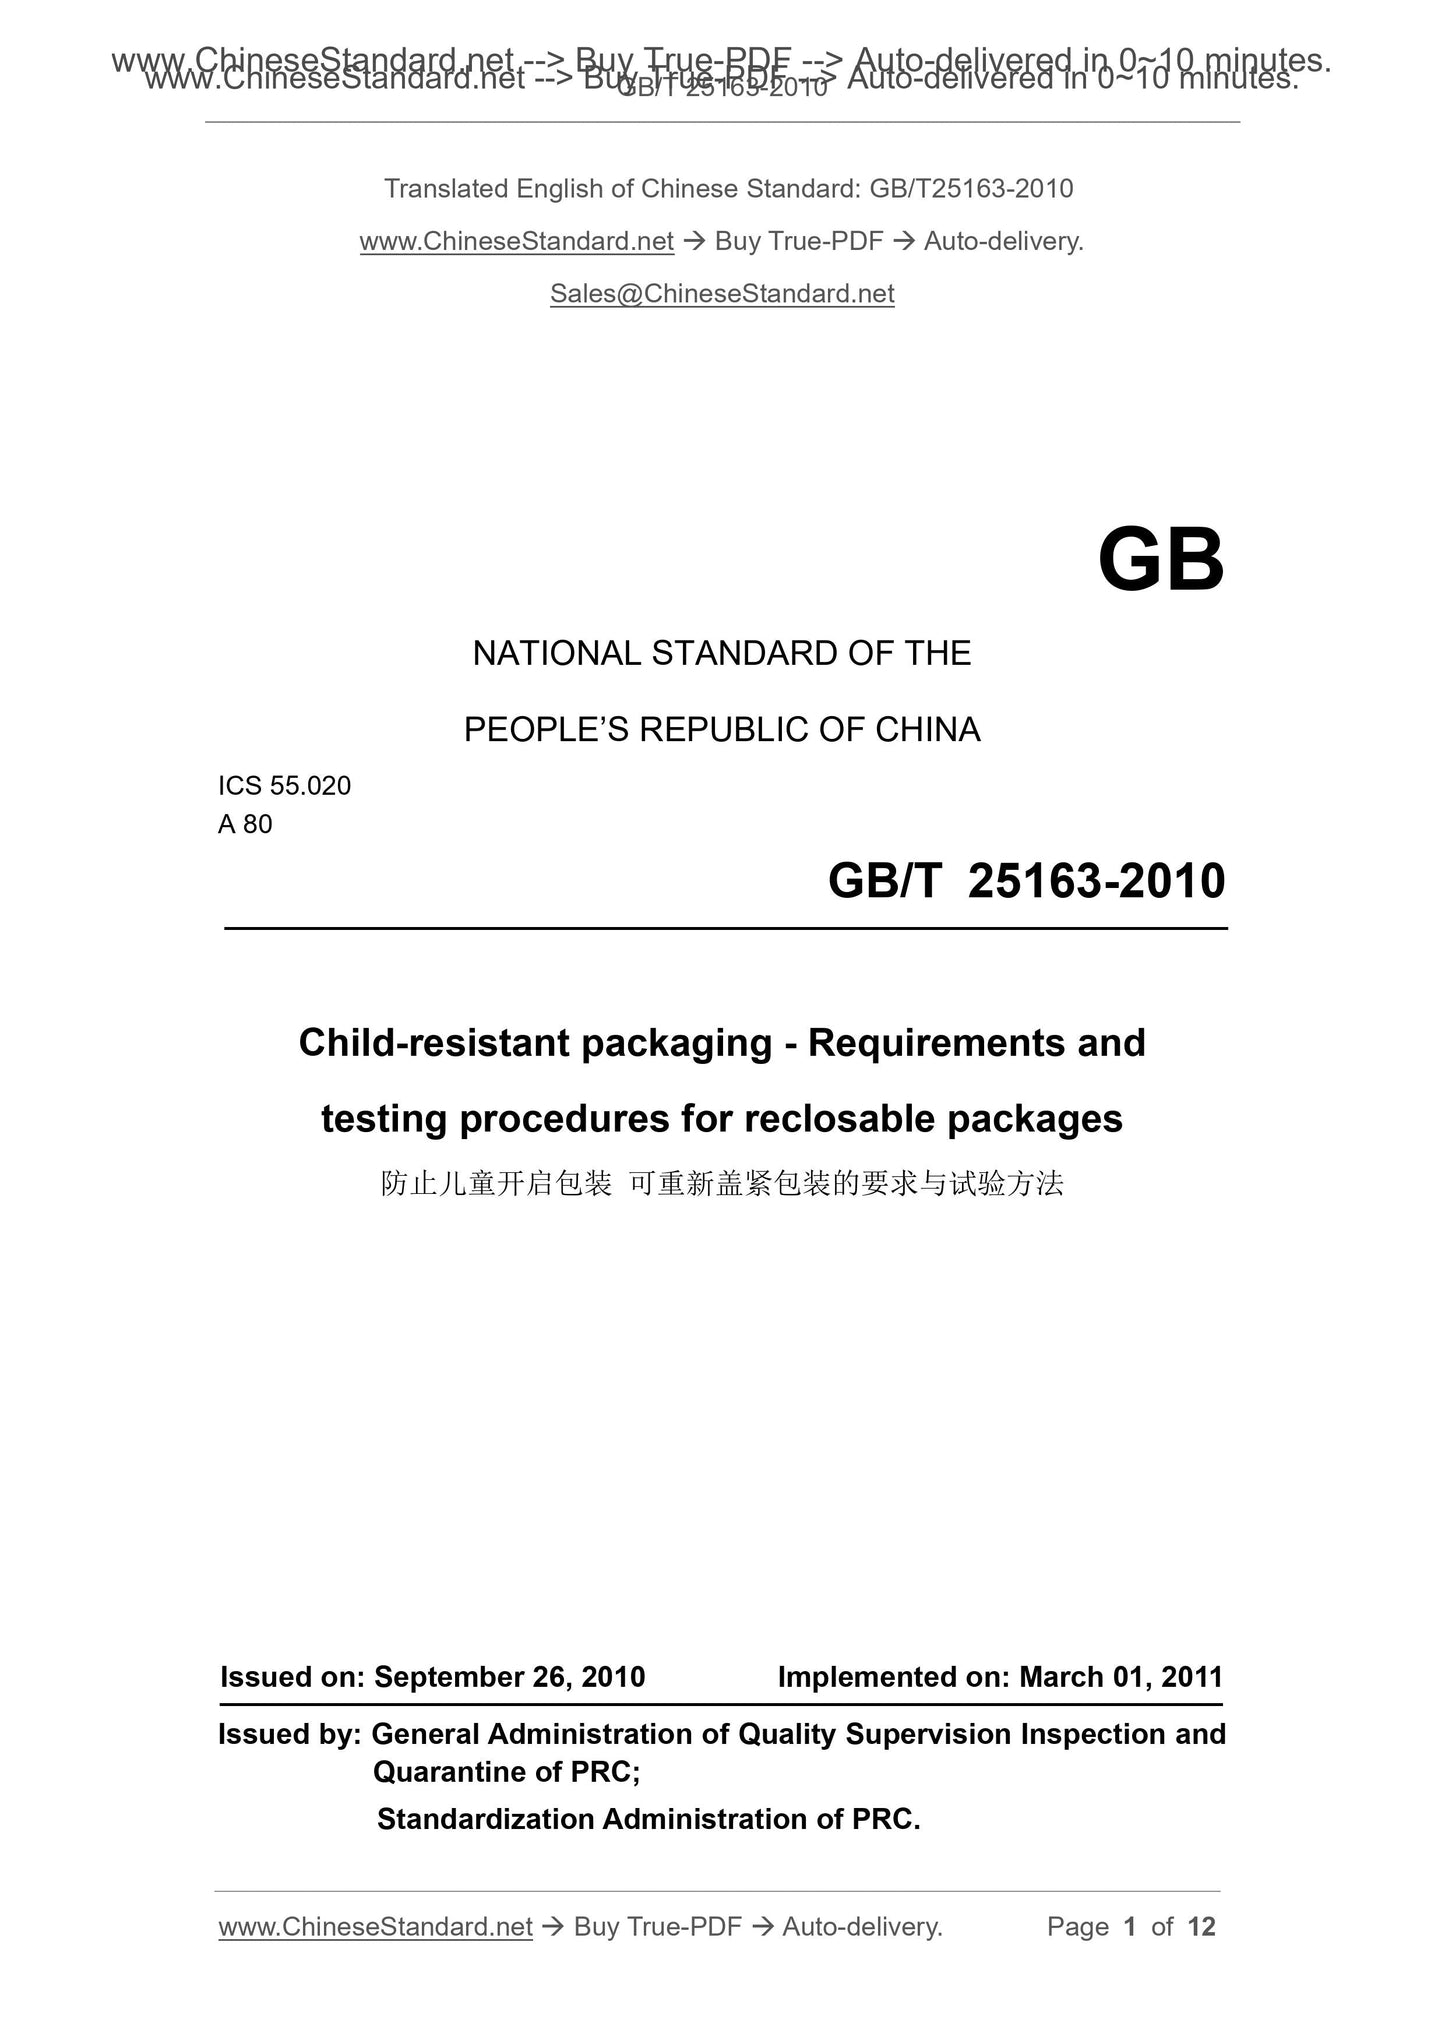 GB/T 25163-2010 Page 1